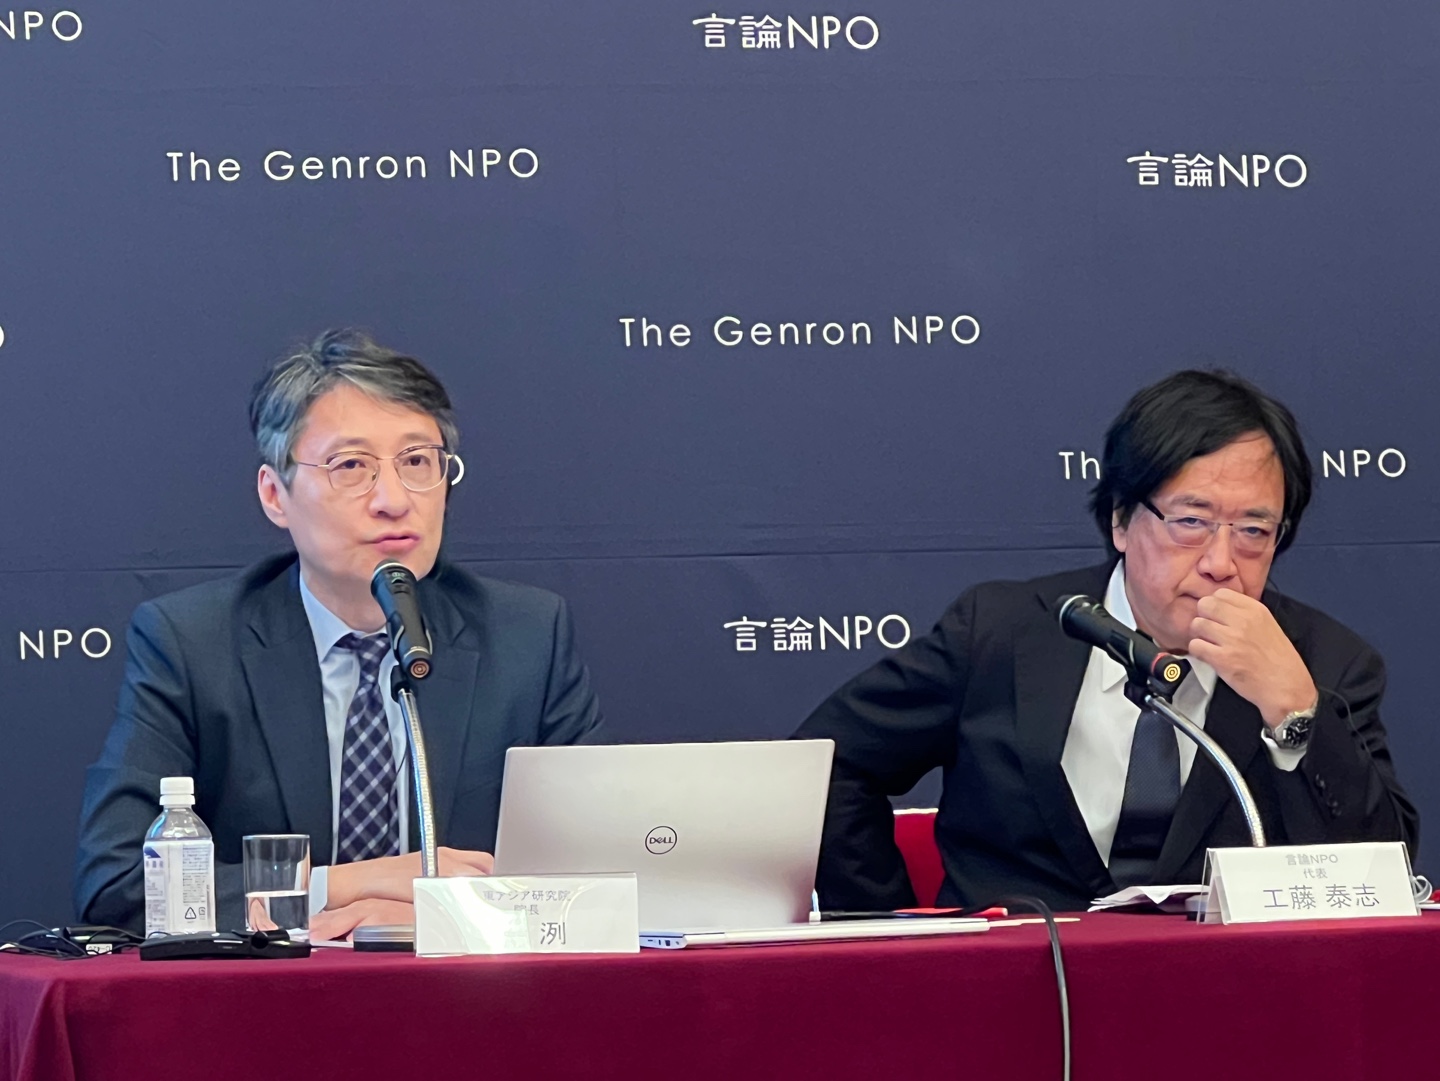 [EAIㆍGenron NPO Joint Press Conference] The 11th Korea-Japan Joint Public Opinion Poll (October 12, 2023)